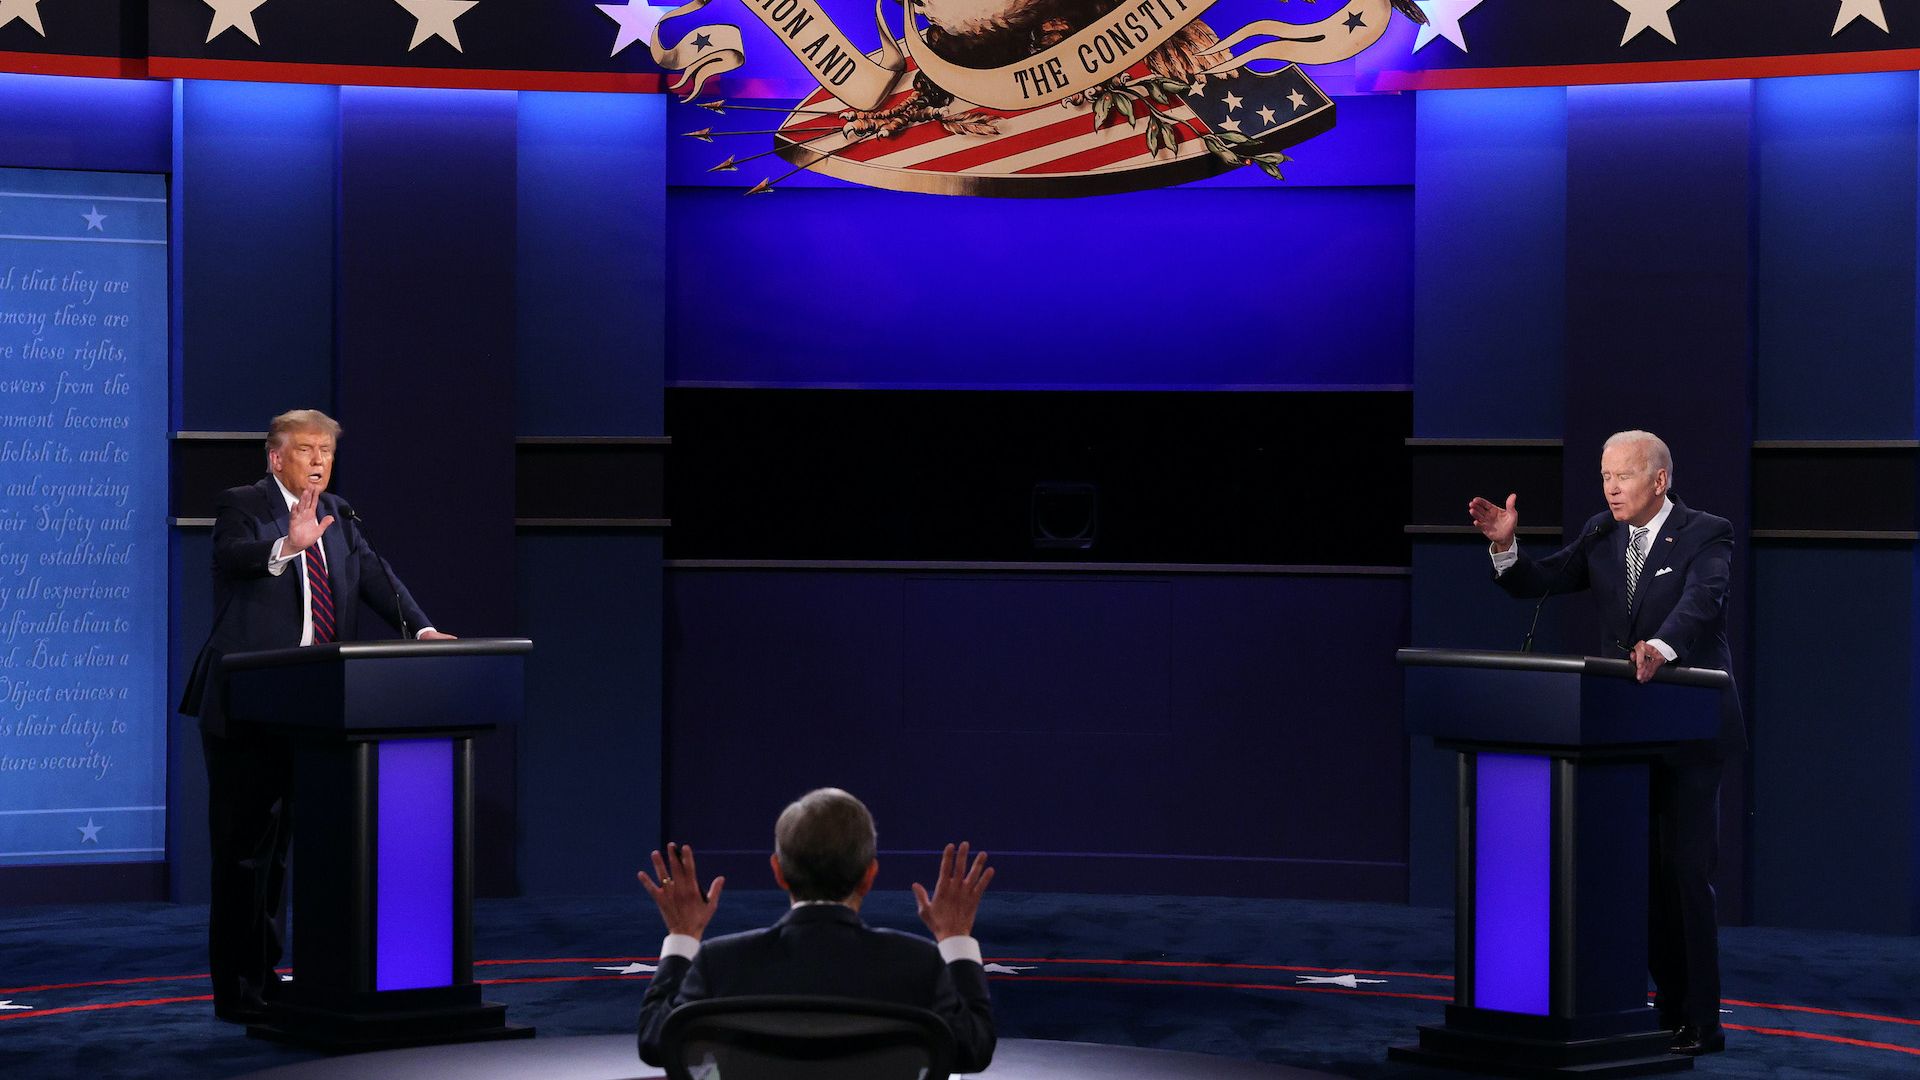 Photo showing President Trump and Joe Biden speaking at the same time at the first presidential debate